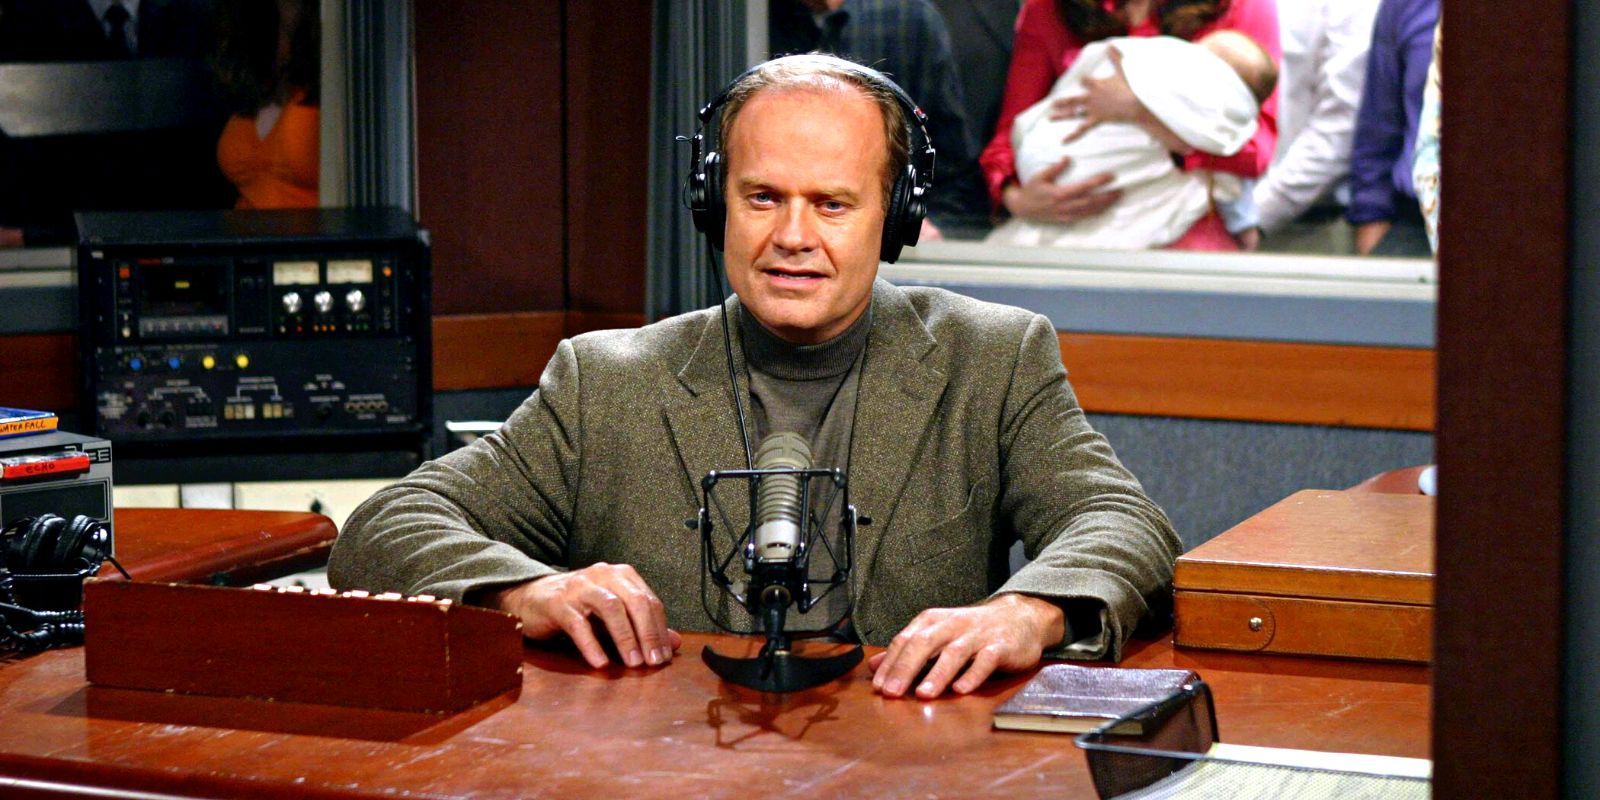 Frasier sitting at his desk with a microphone in front of him